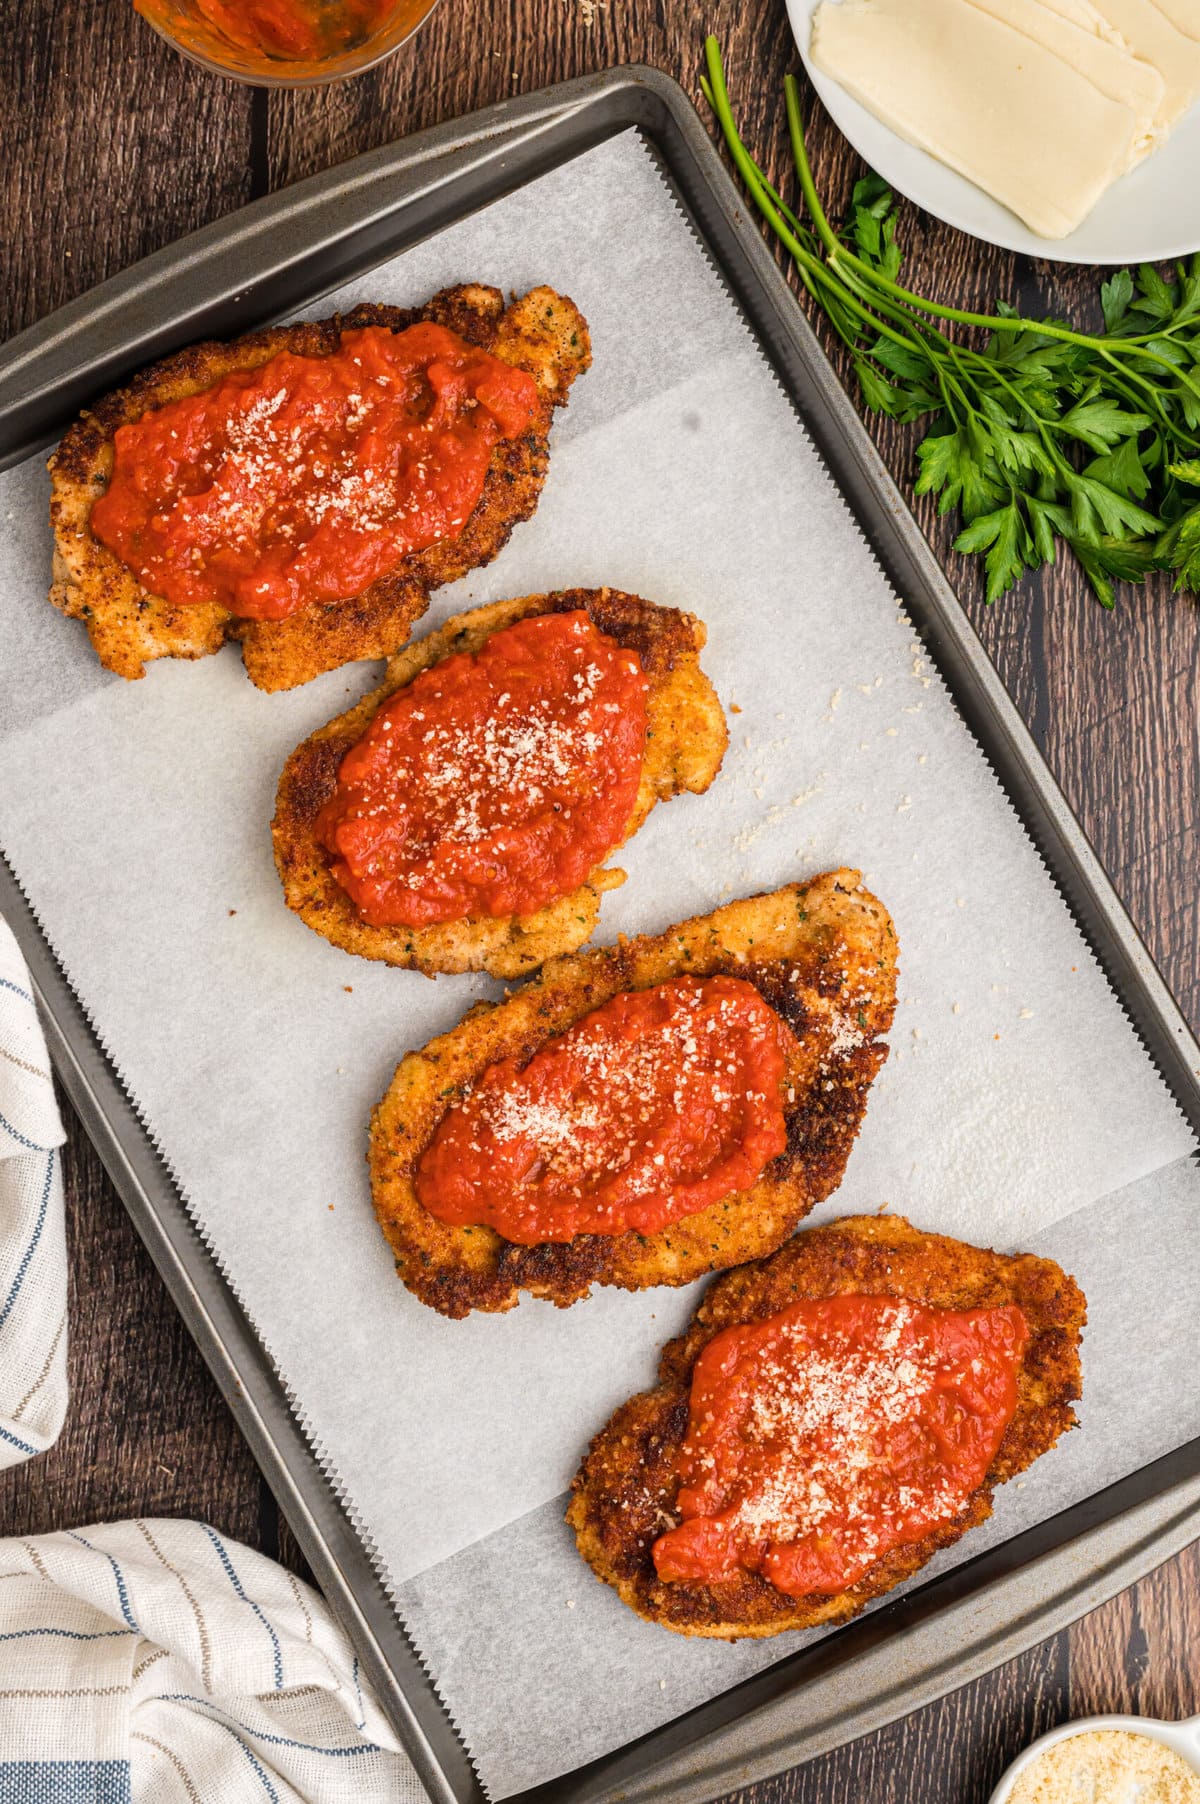 Fried chicken breasts topped with marinara sauce